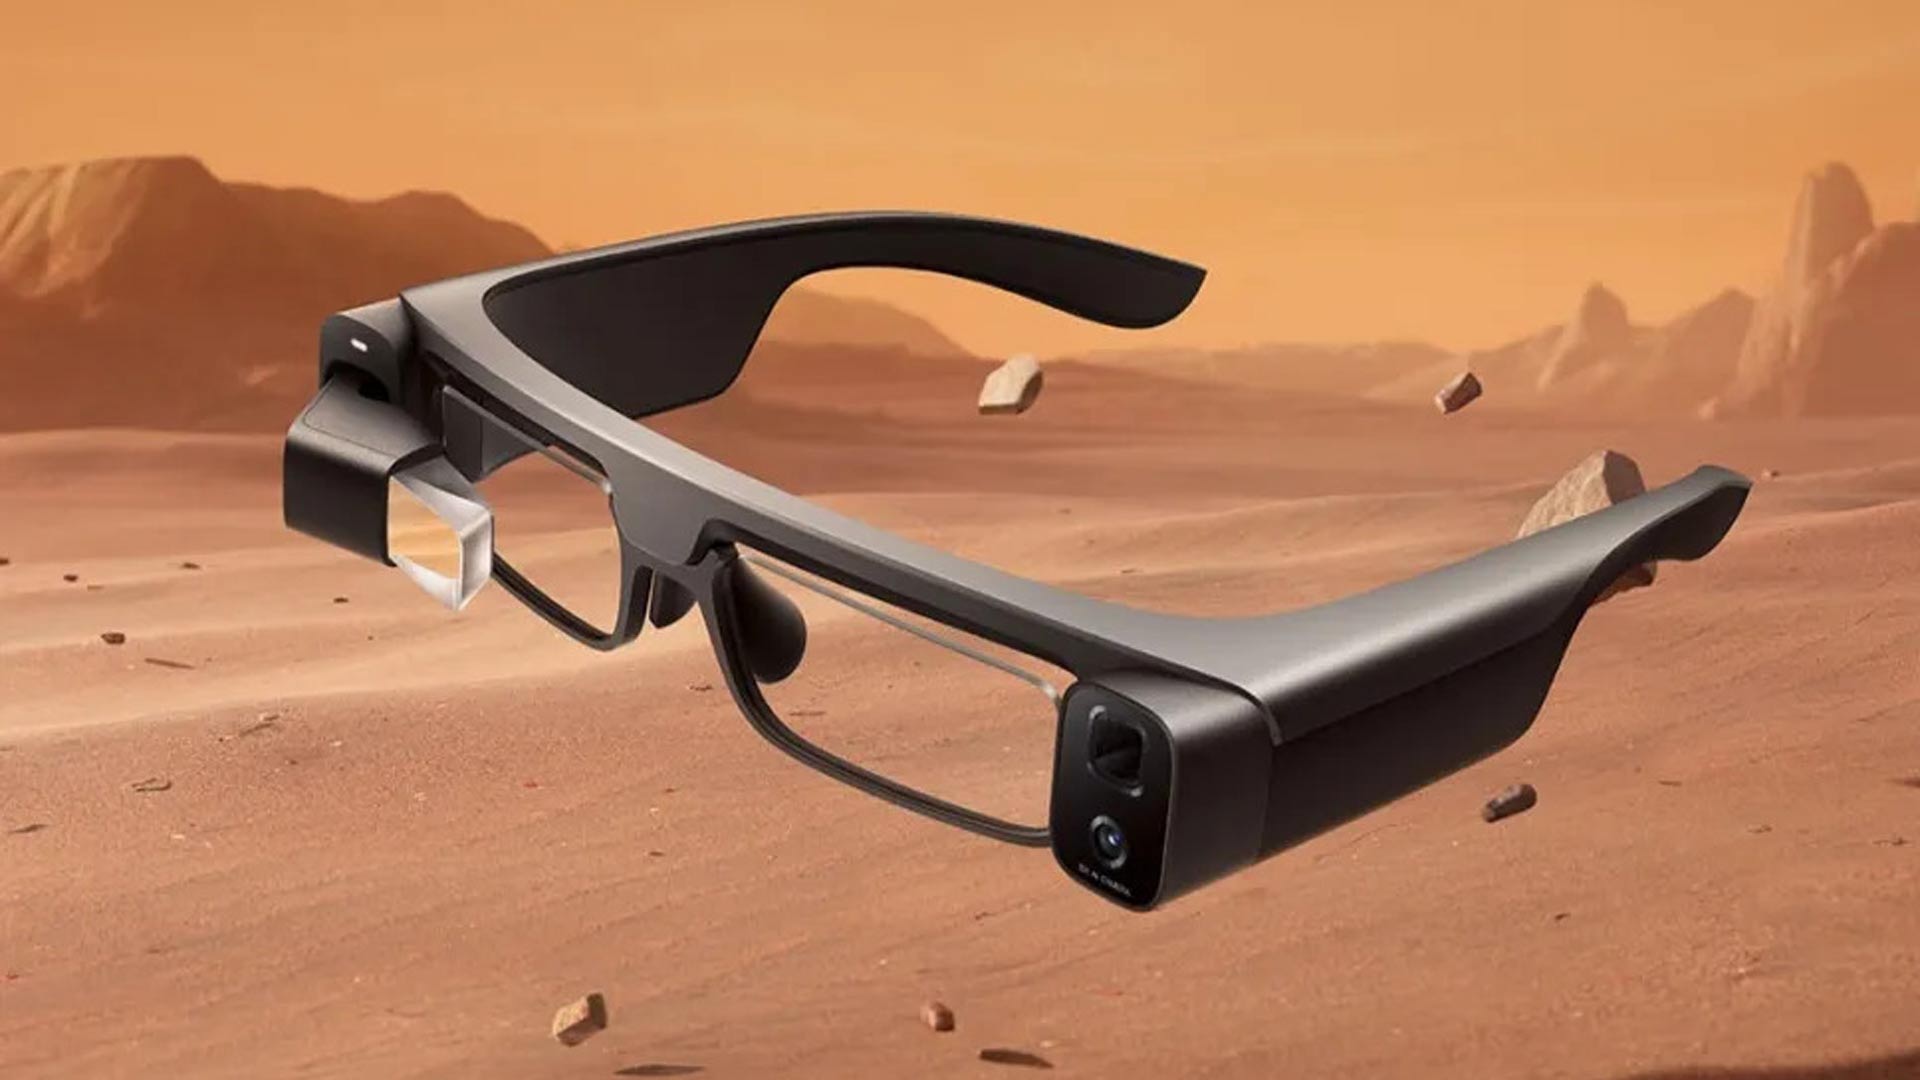 Xiaomi Unveils Consumer Smart Glasses with 50 MP Camera & Micro OLED Display